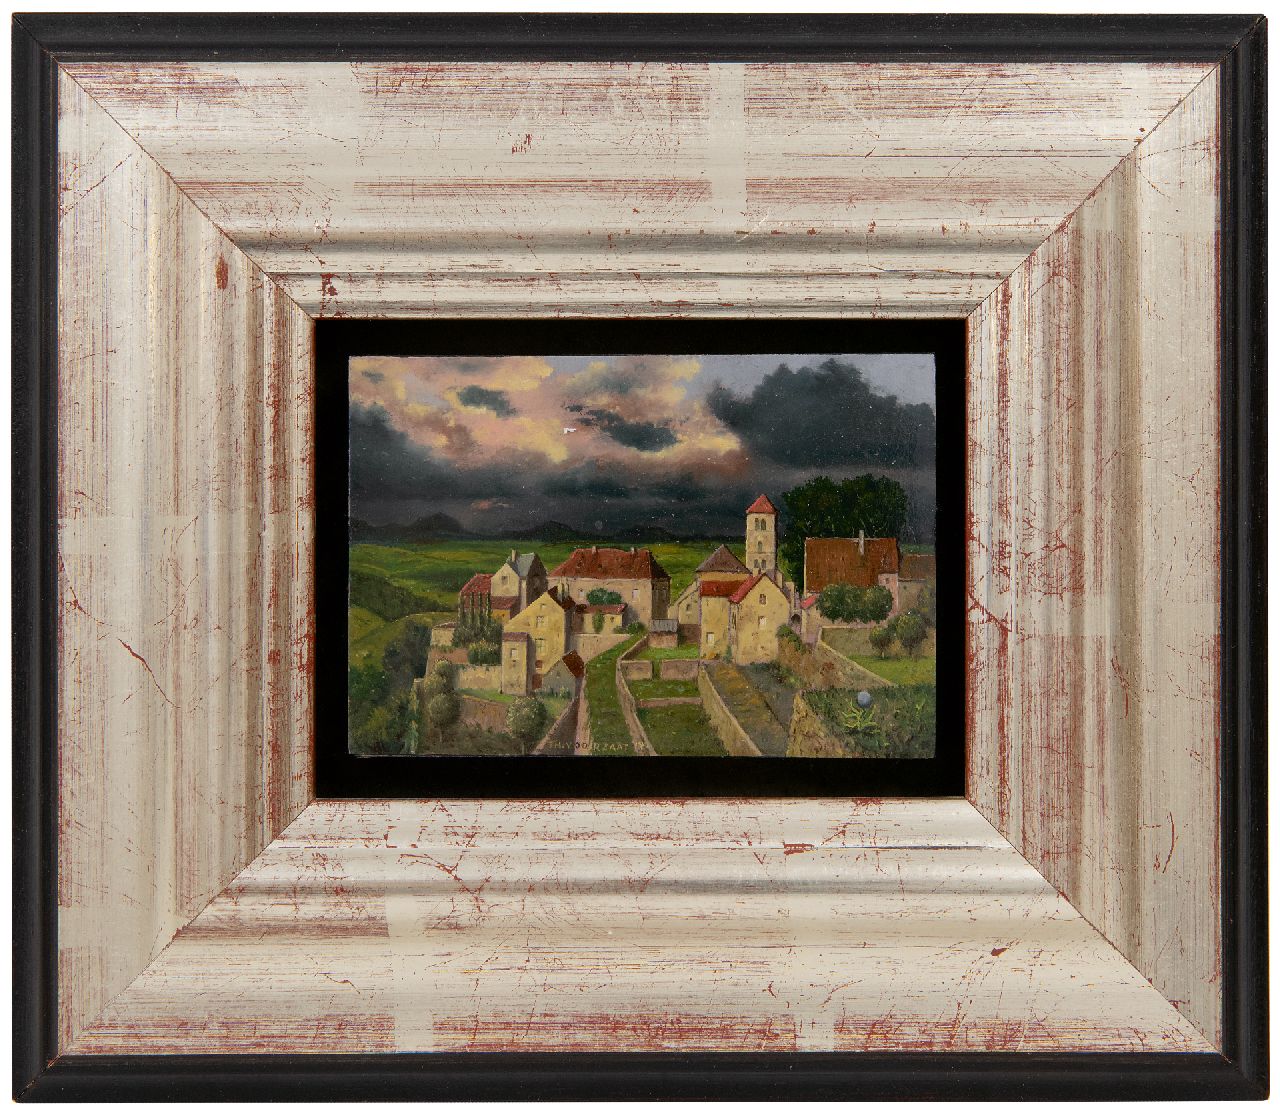 Voorzaat T.  | Theo Voorzaat | Paintings offered for sale | Village in France, oil on panel 7.3 x 10.5 cm